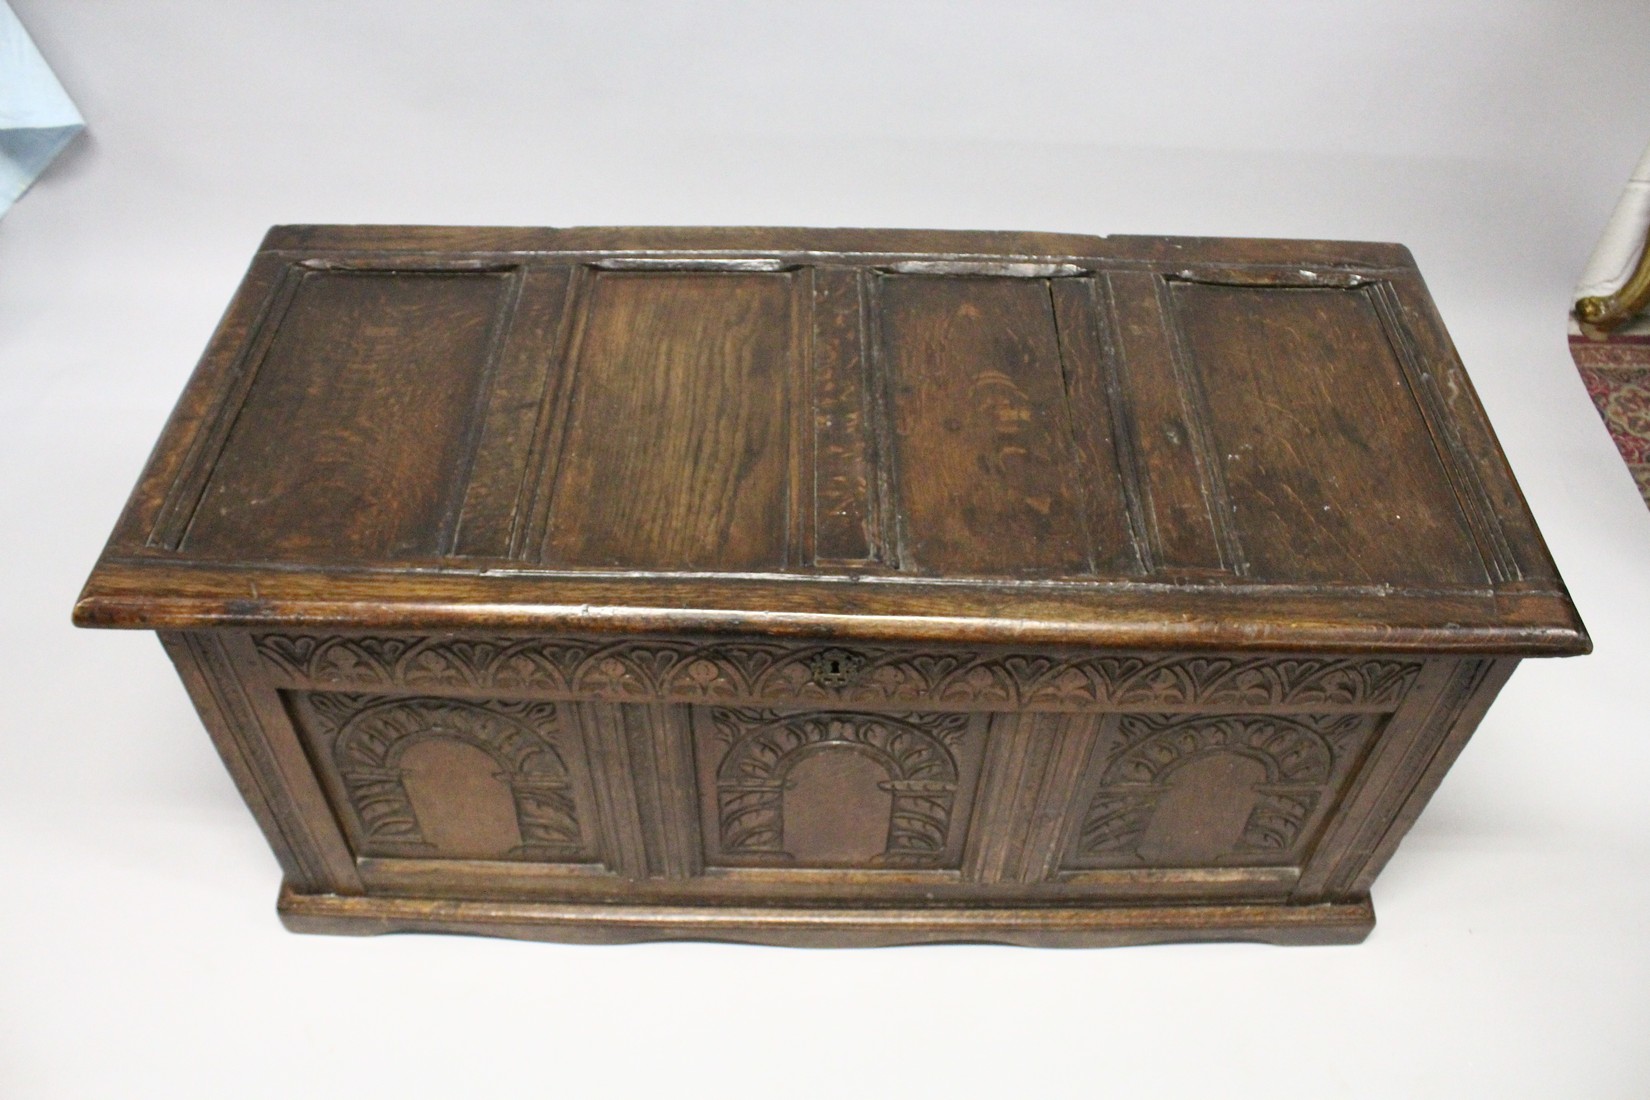 AN 18TH CENTURY OAK COFFER with a panelled top and triple panelled front, carved with arches. 4ft - Image 3 of 4